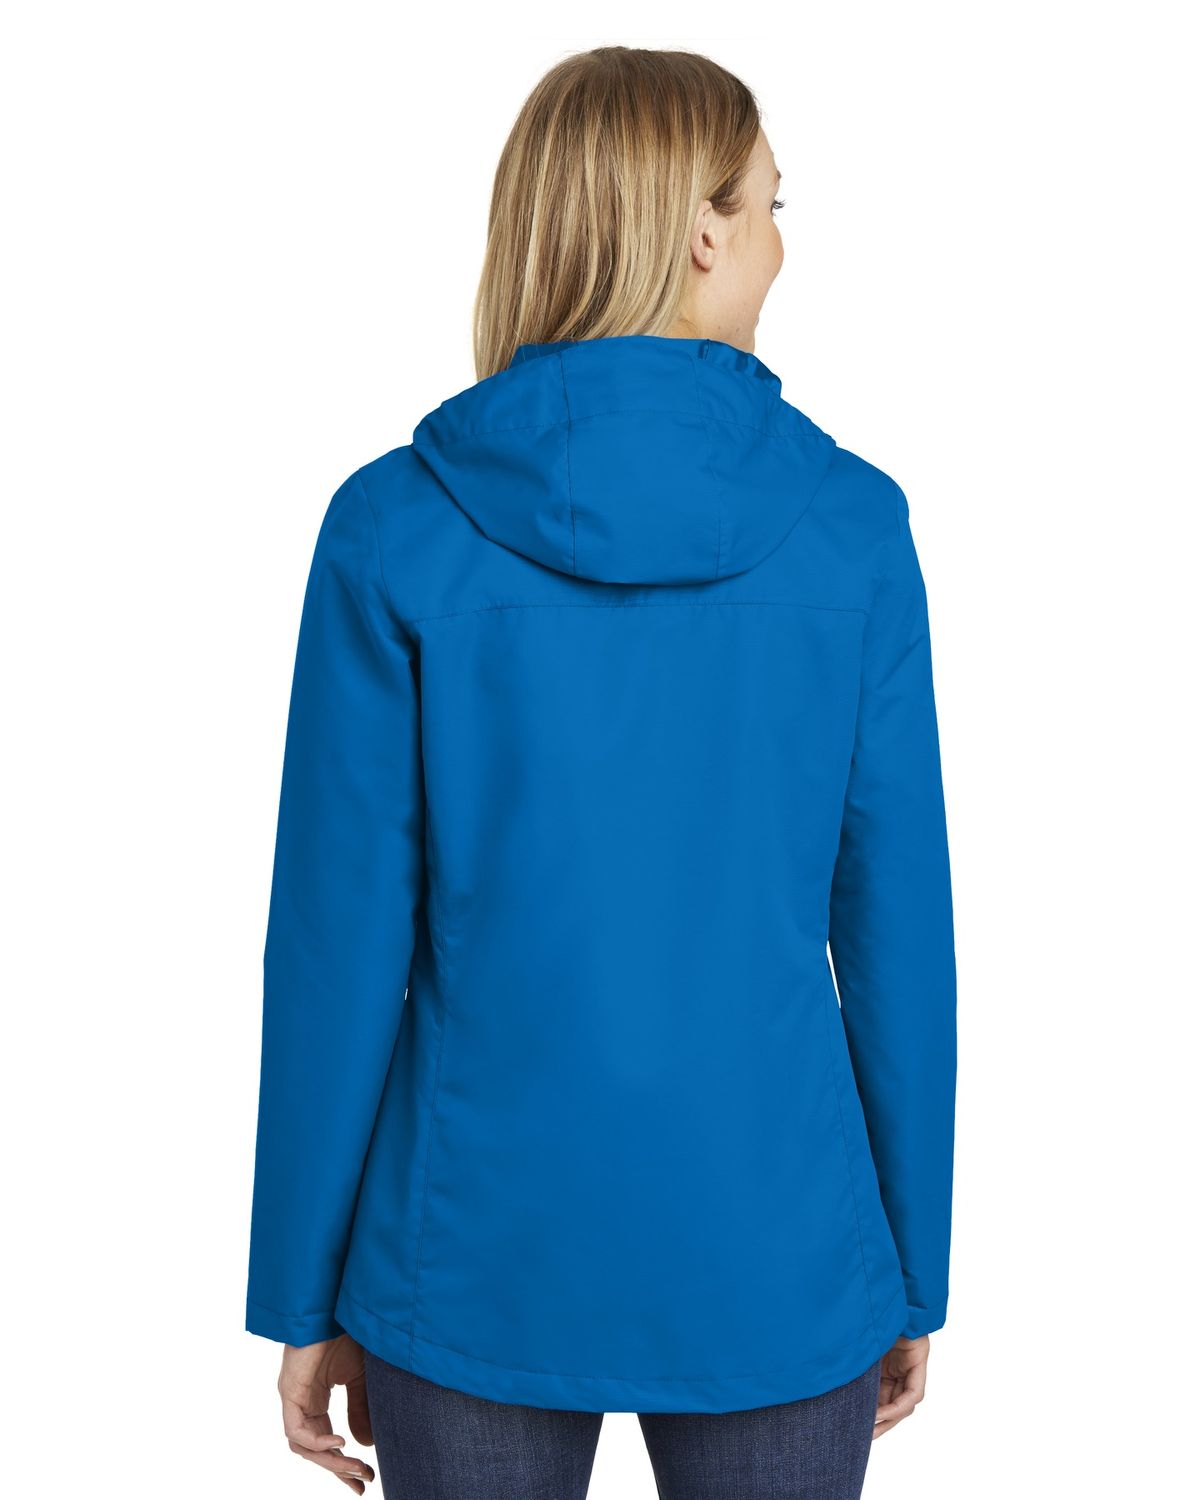 'Port Authority L331 Ladies All-Conditions Jacket'